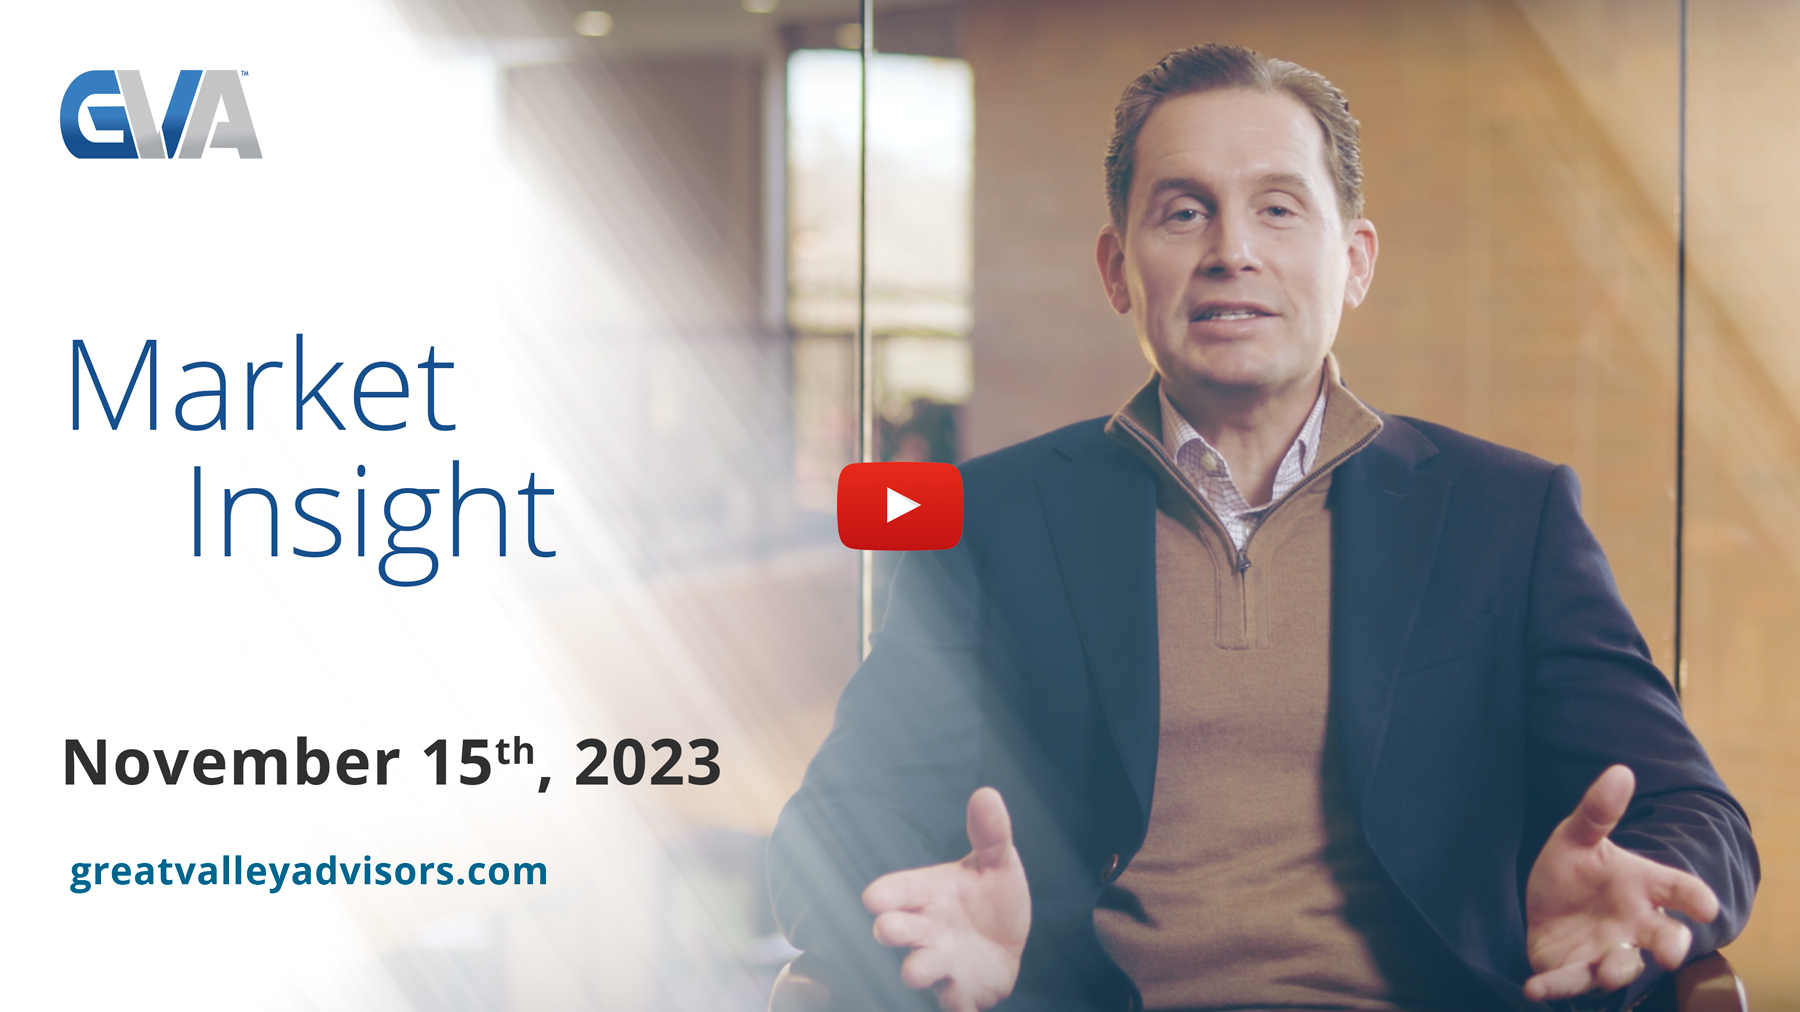 Market Insights with Eric: Episode 13, November 15th, 2023